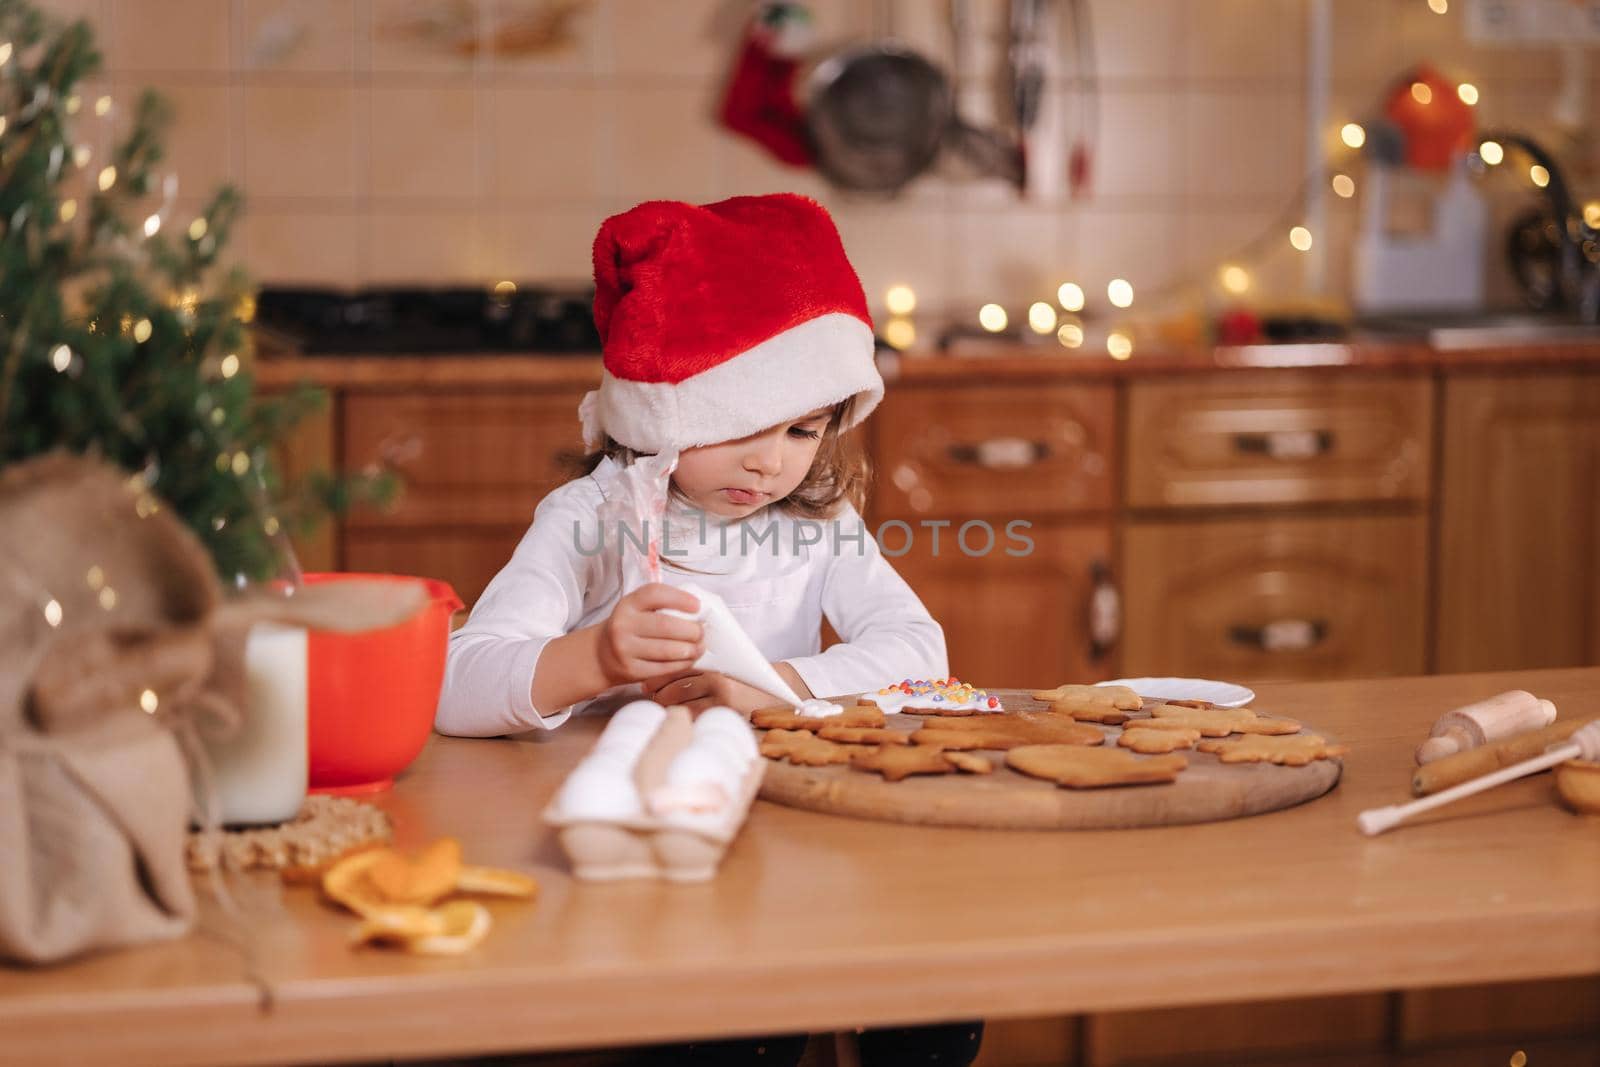 Little girl in santa hat decorates gingerbread using multicolored beads. Christmas and New Year traditions concept. Christmas bakery. Happy hollidays.